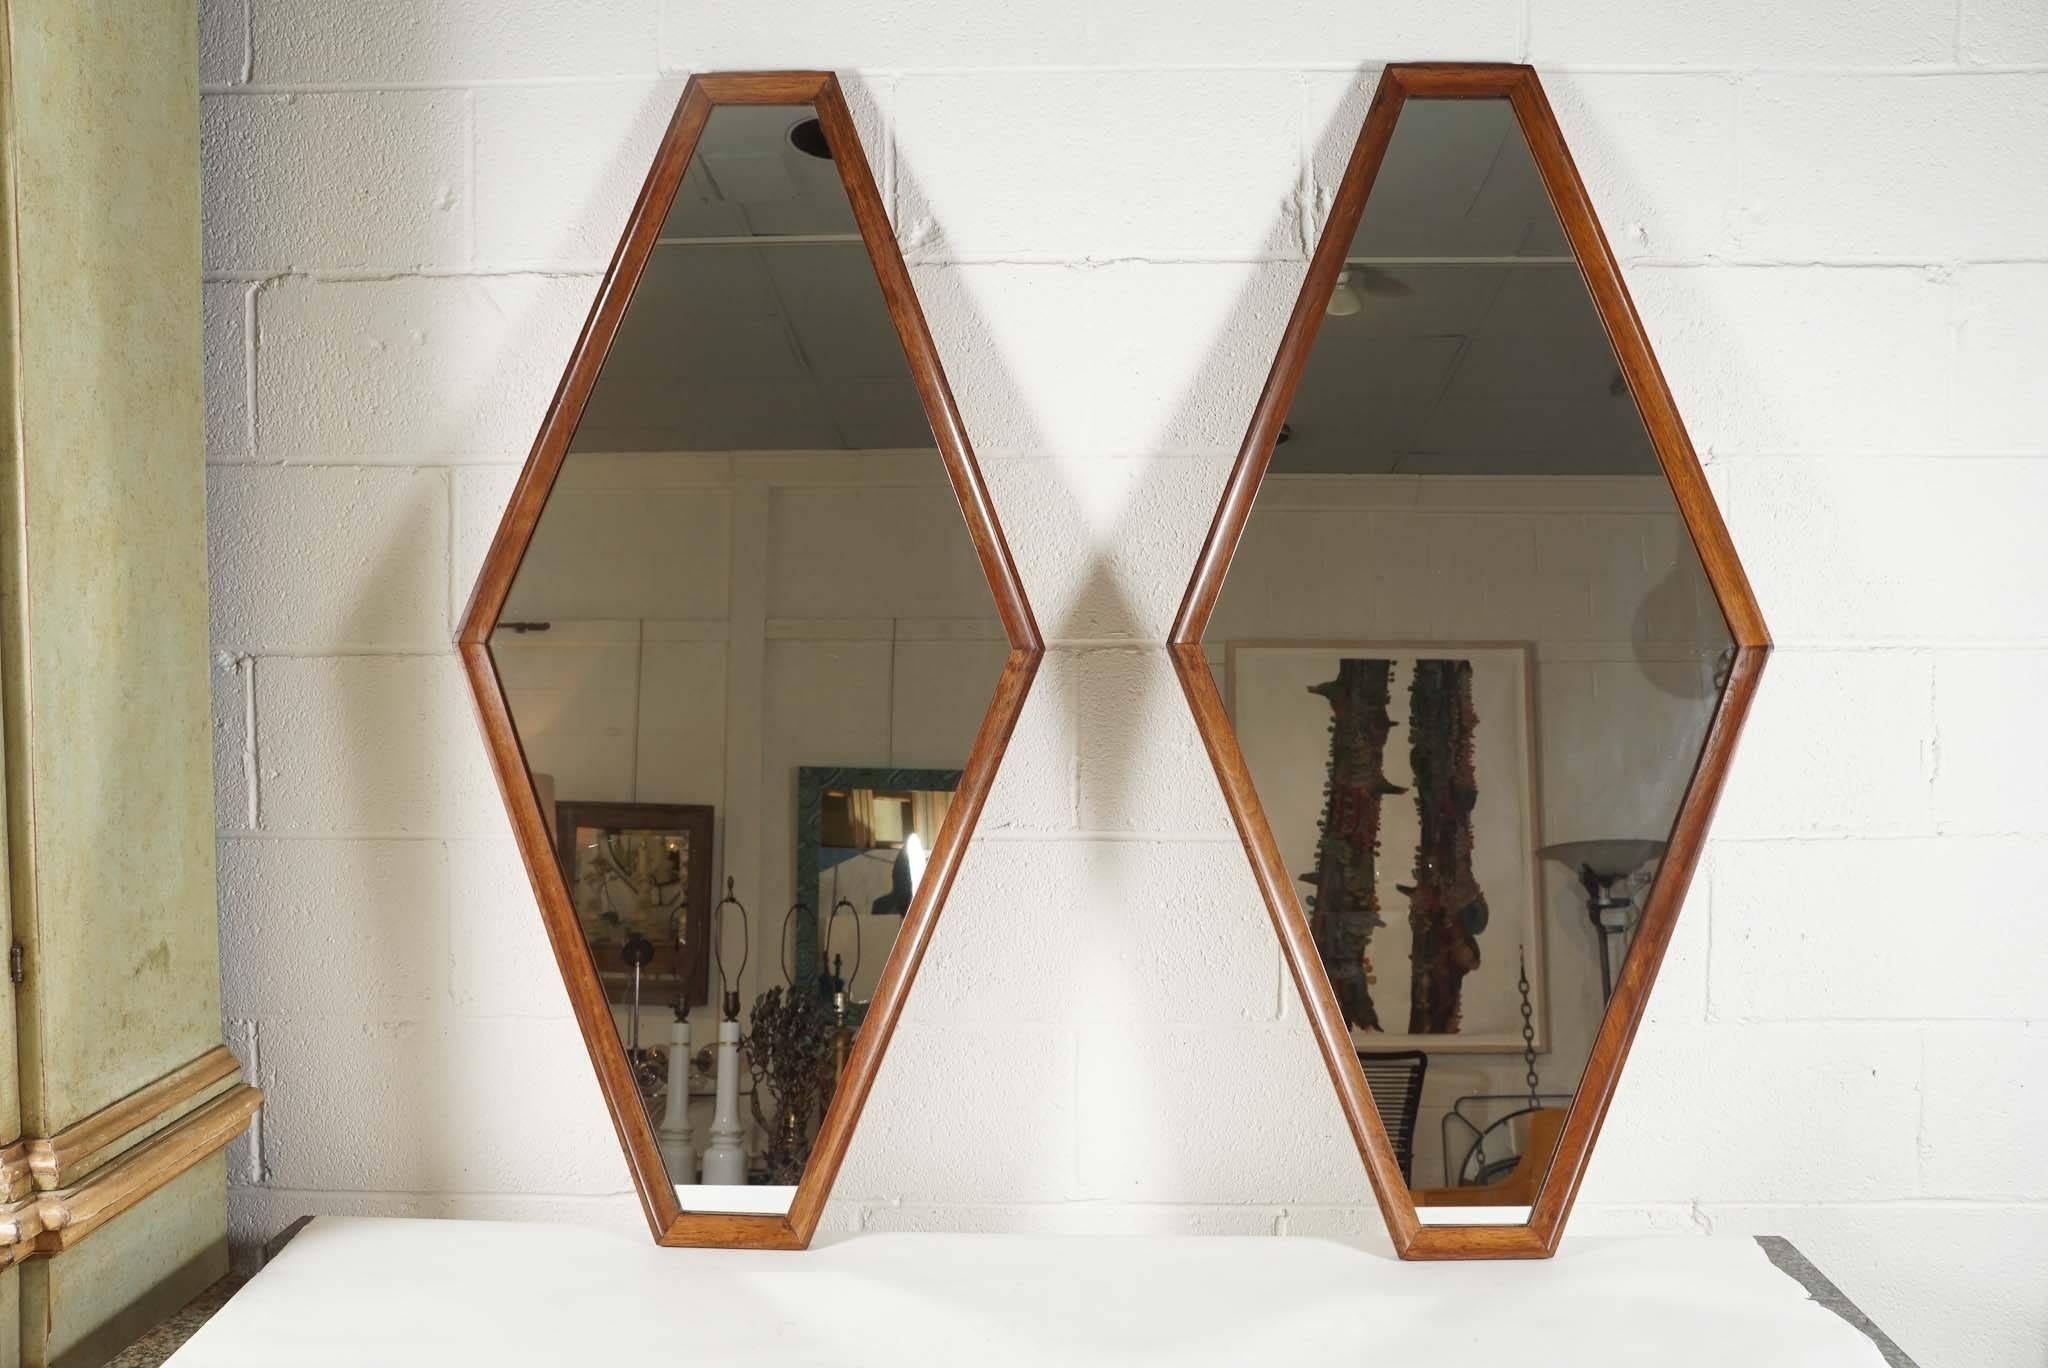 Here is a great pair of modern diamond shaped mirrors with a light walnut wood surround. The wood frame is inset with a raised edge.